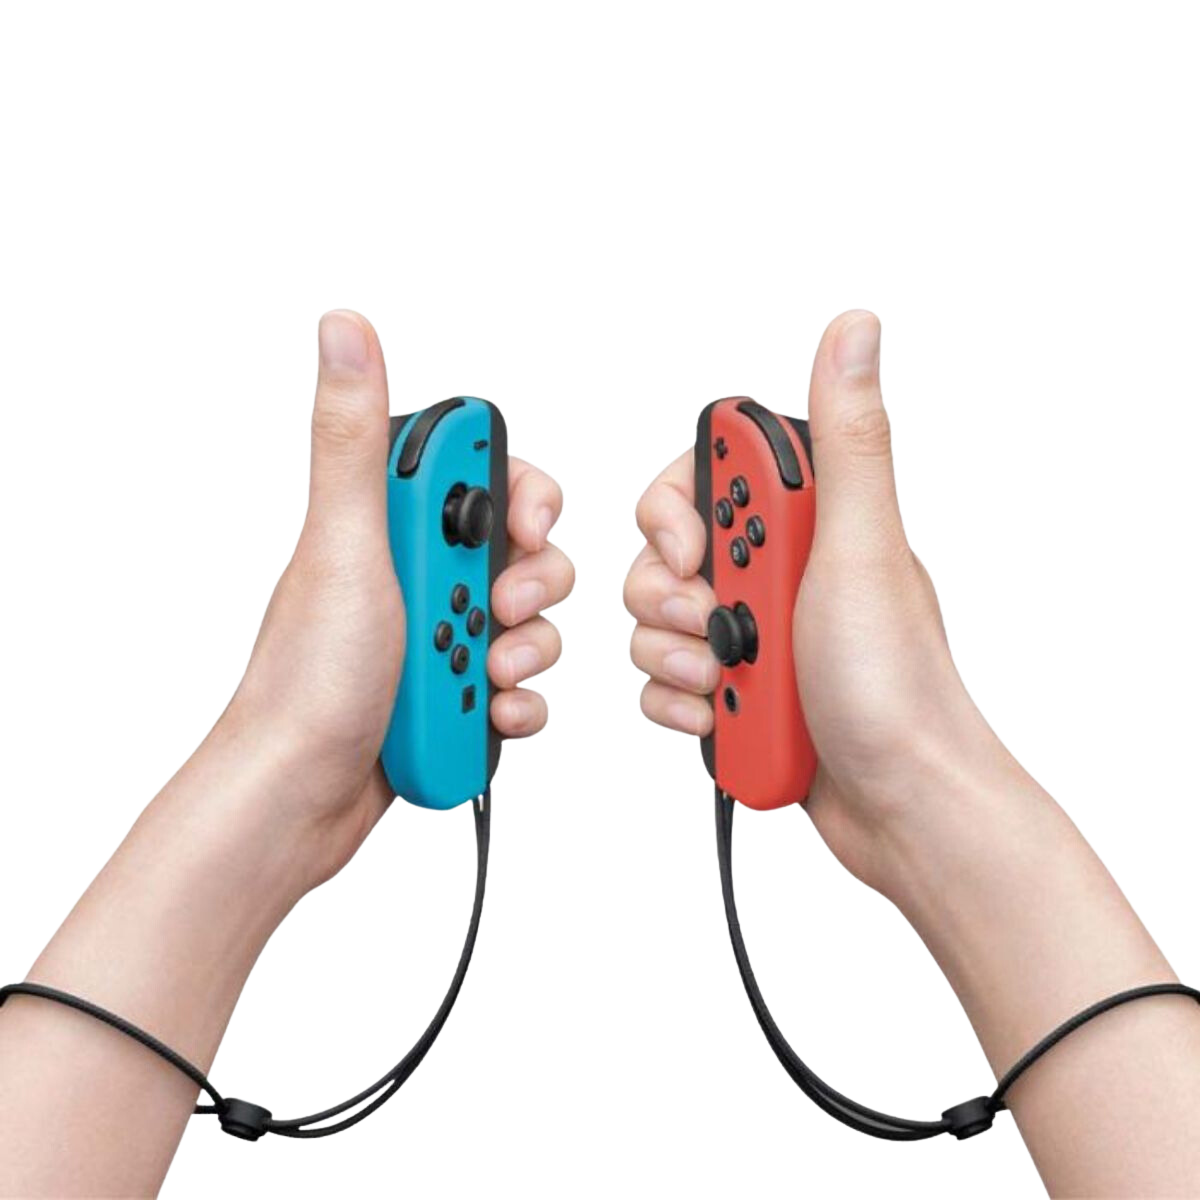 Consola Switch Neon